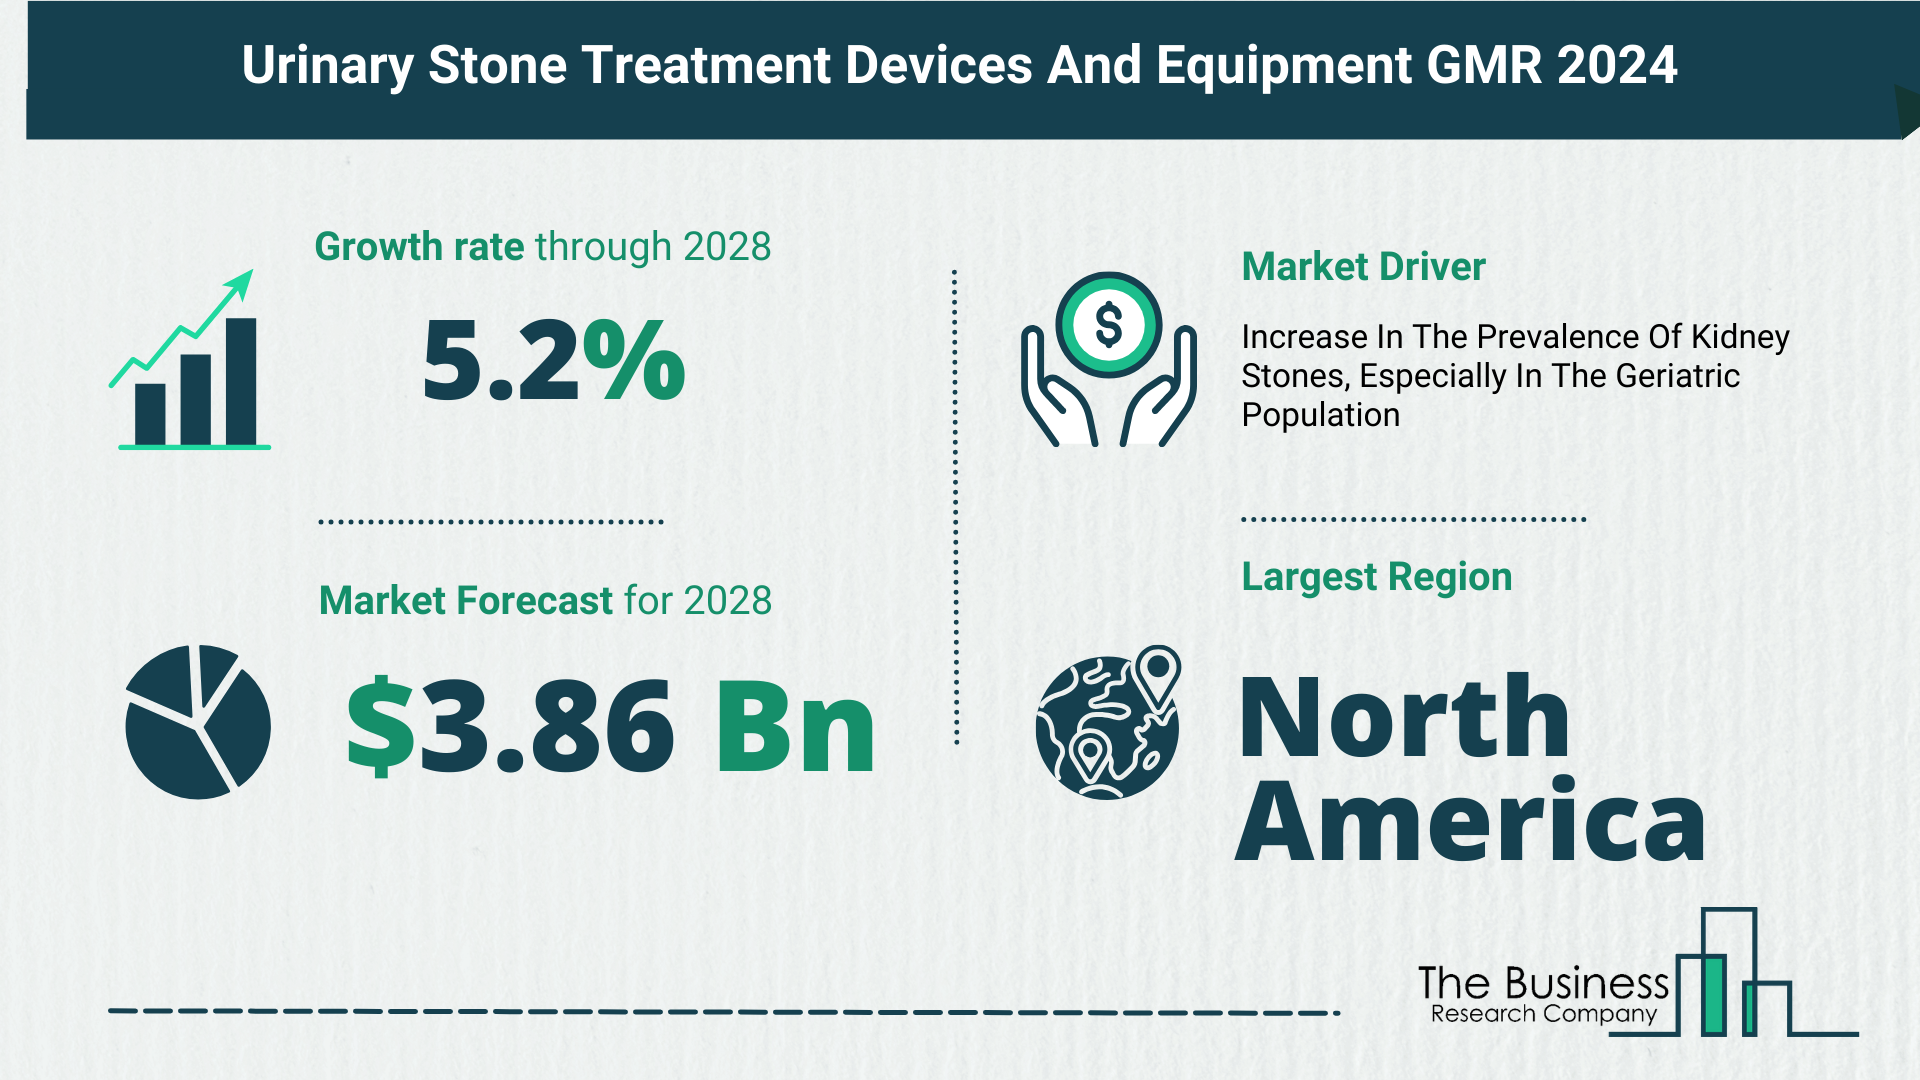 Understand How The Urinary Stone Treatment Devices And Equipment Market Is Poised To Grow Through 2024-2033